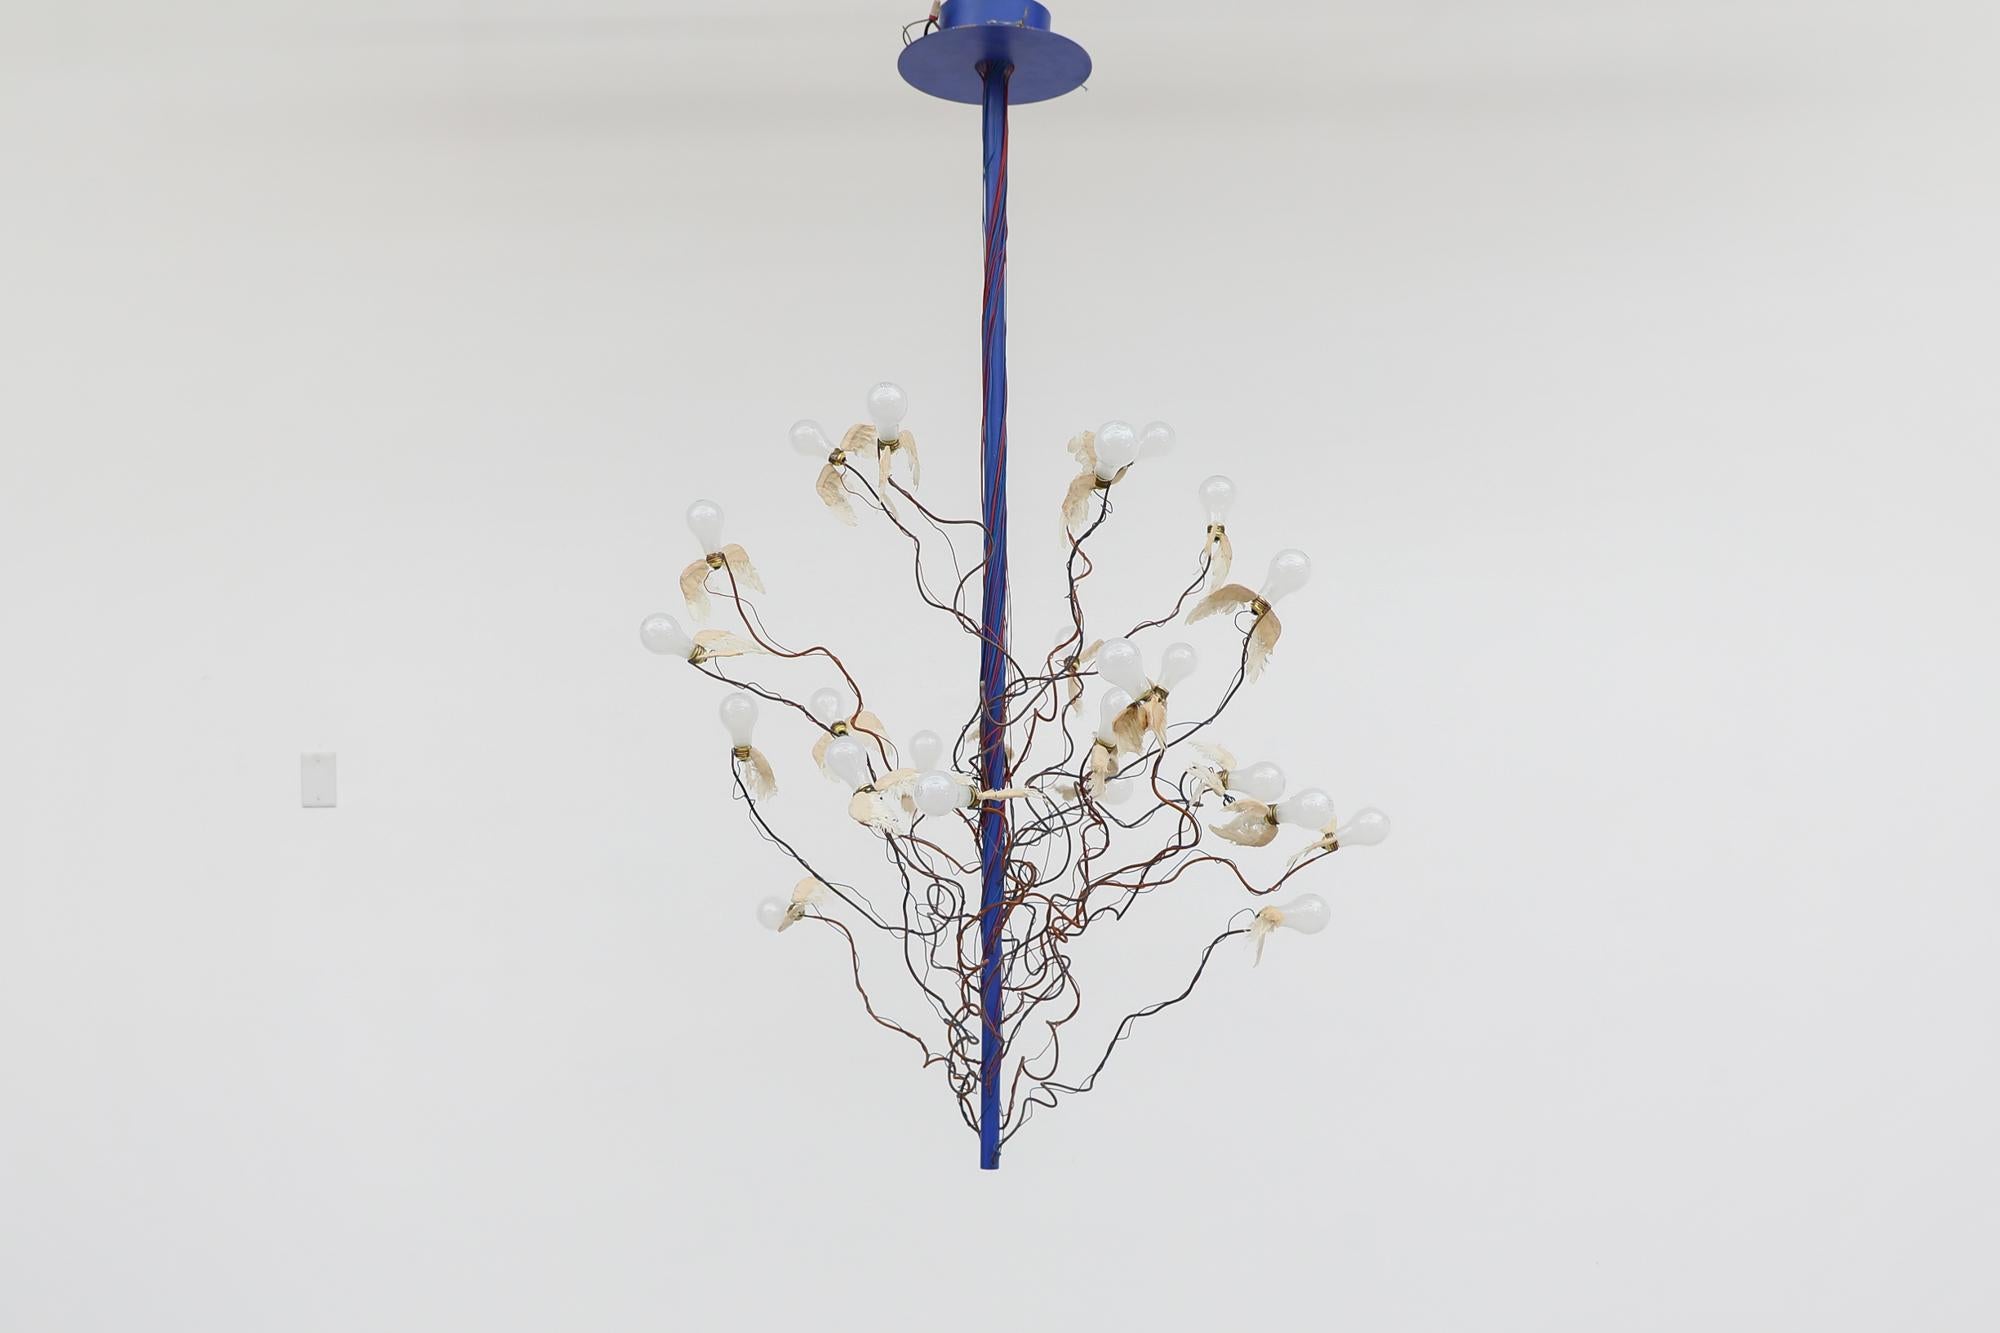 Ingo Maurer 'Birds Birds Birds' Chandelier with real goose feather wings on individually adjustable electrical cable arms and blue enameled metal frame. An artistic take on the relationship between the animal world using modest materials. in very